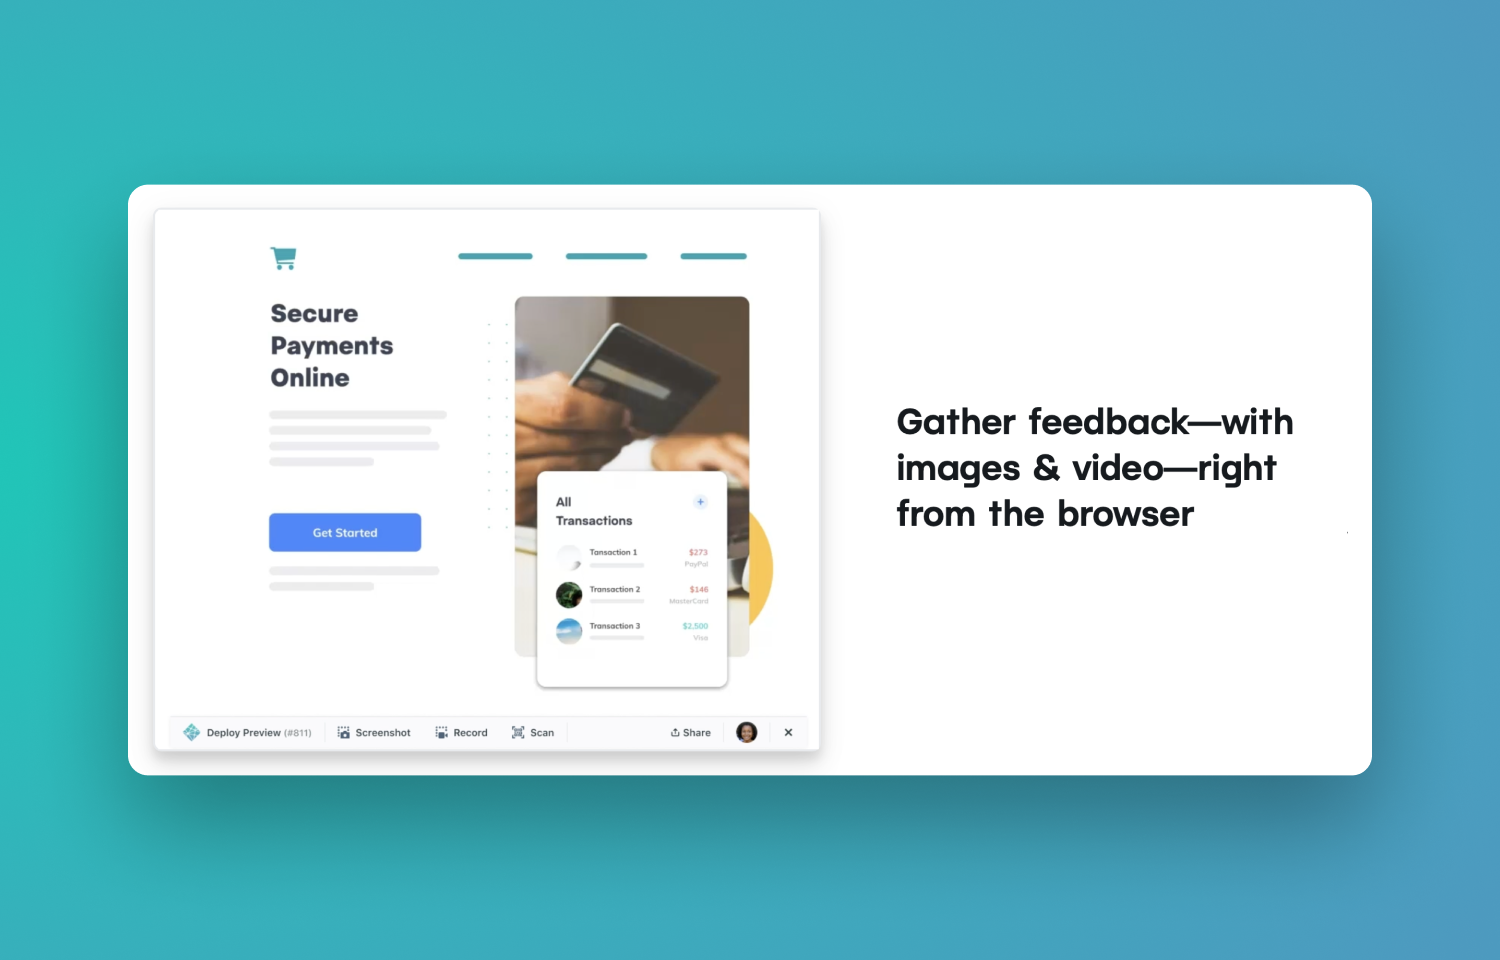 Gather feedback – with images & video – right from the browser.